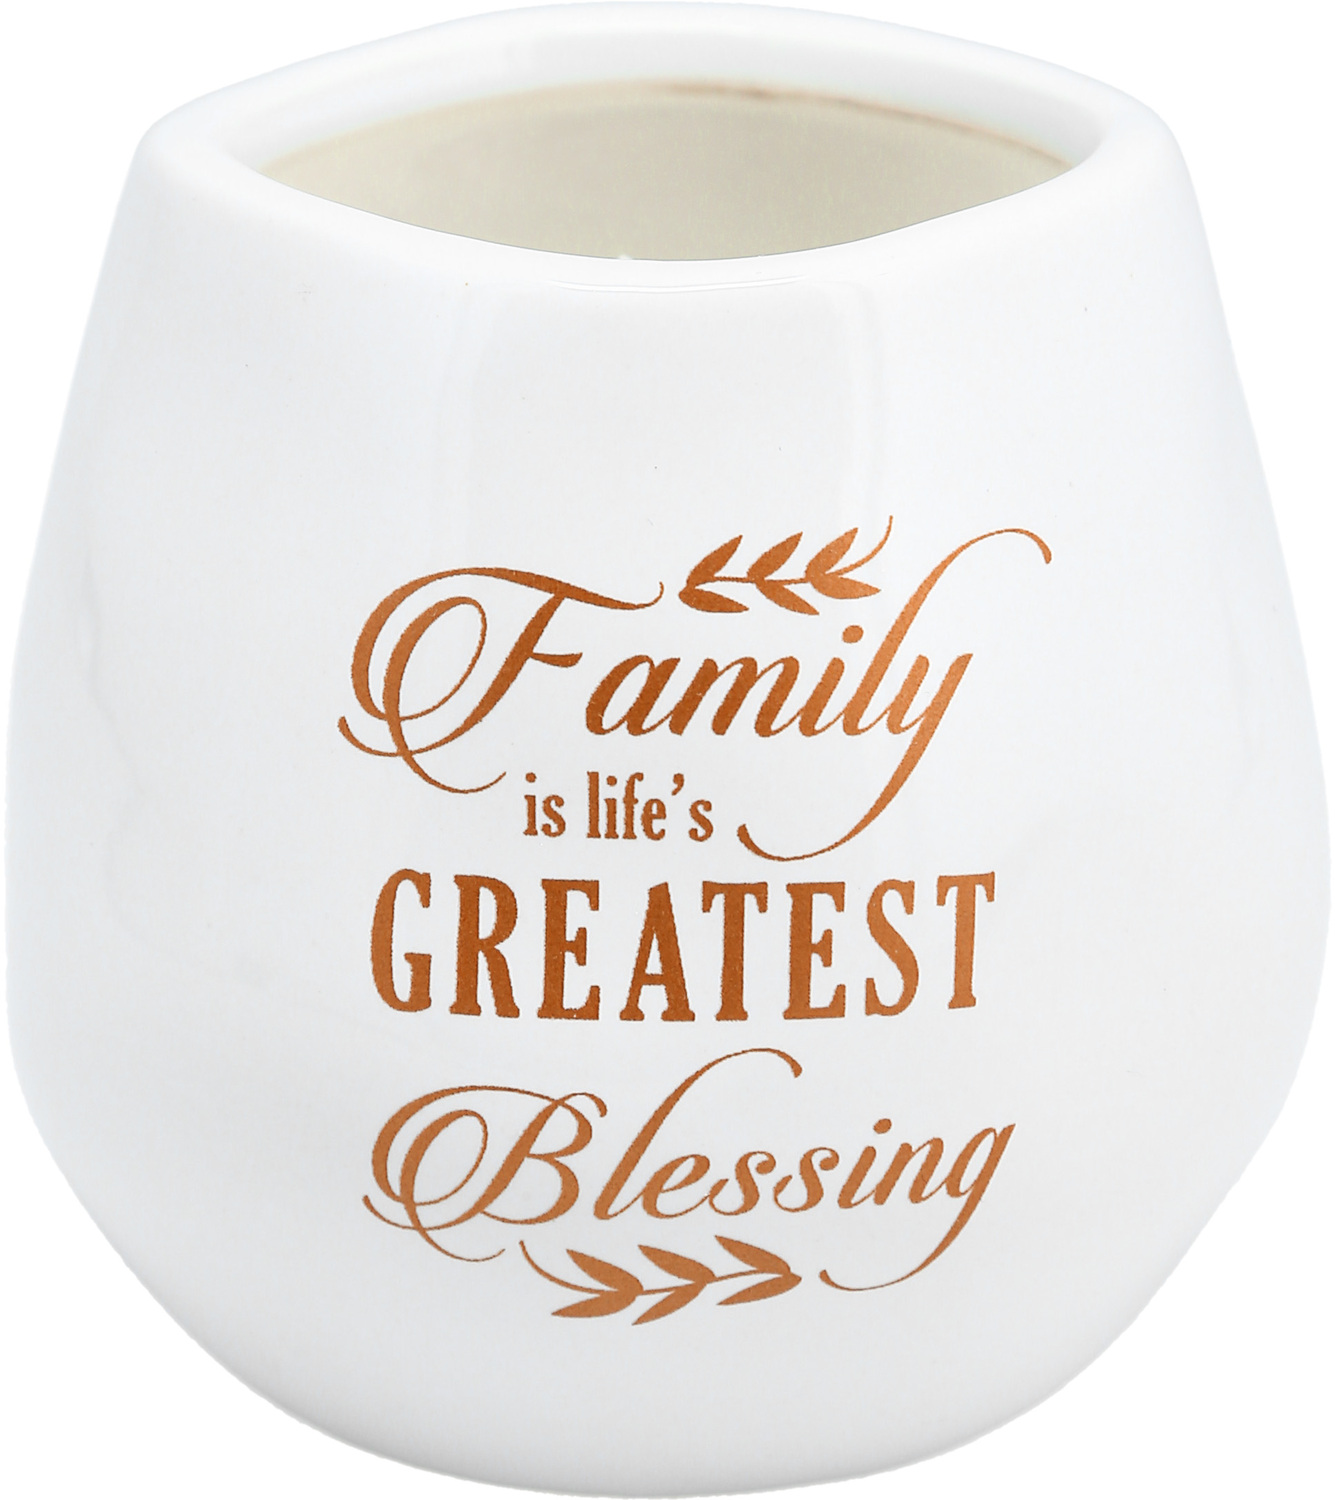 Family by Blessed by You - Family - 8 oz - 100% Soy Wax Candle
Scent: Serenity